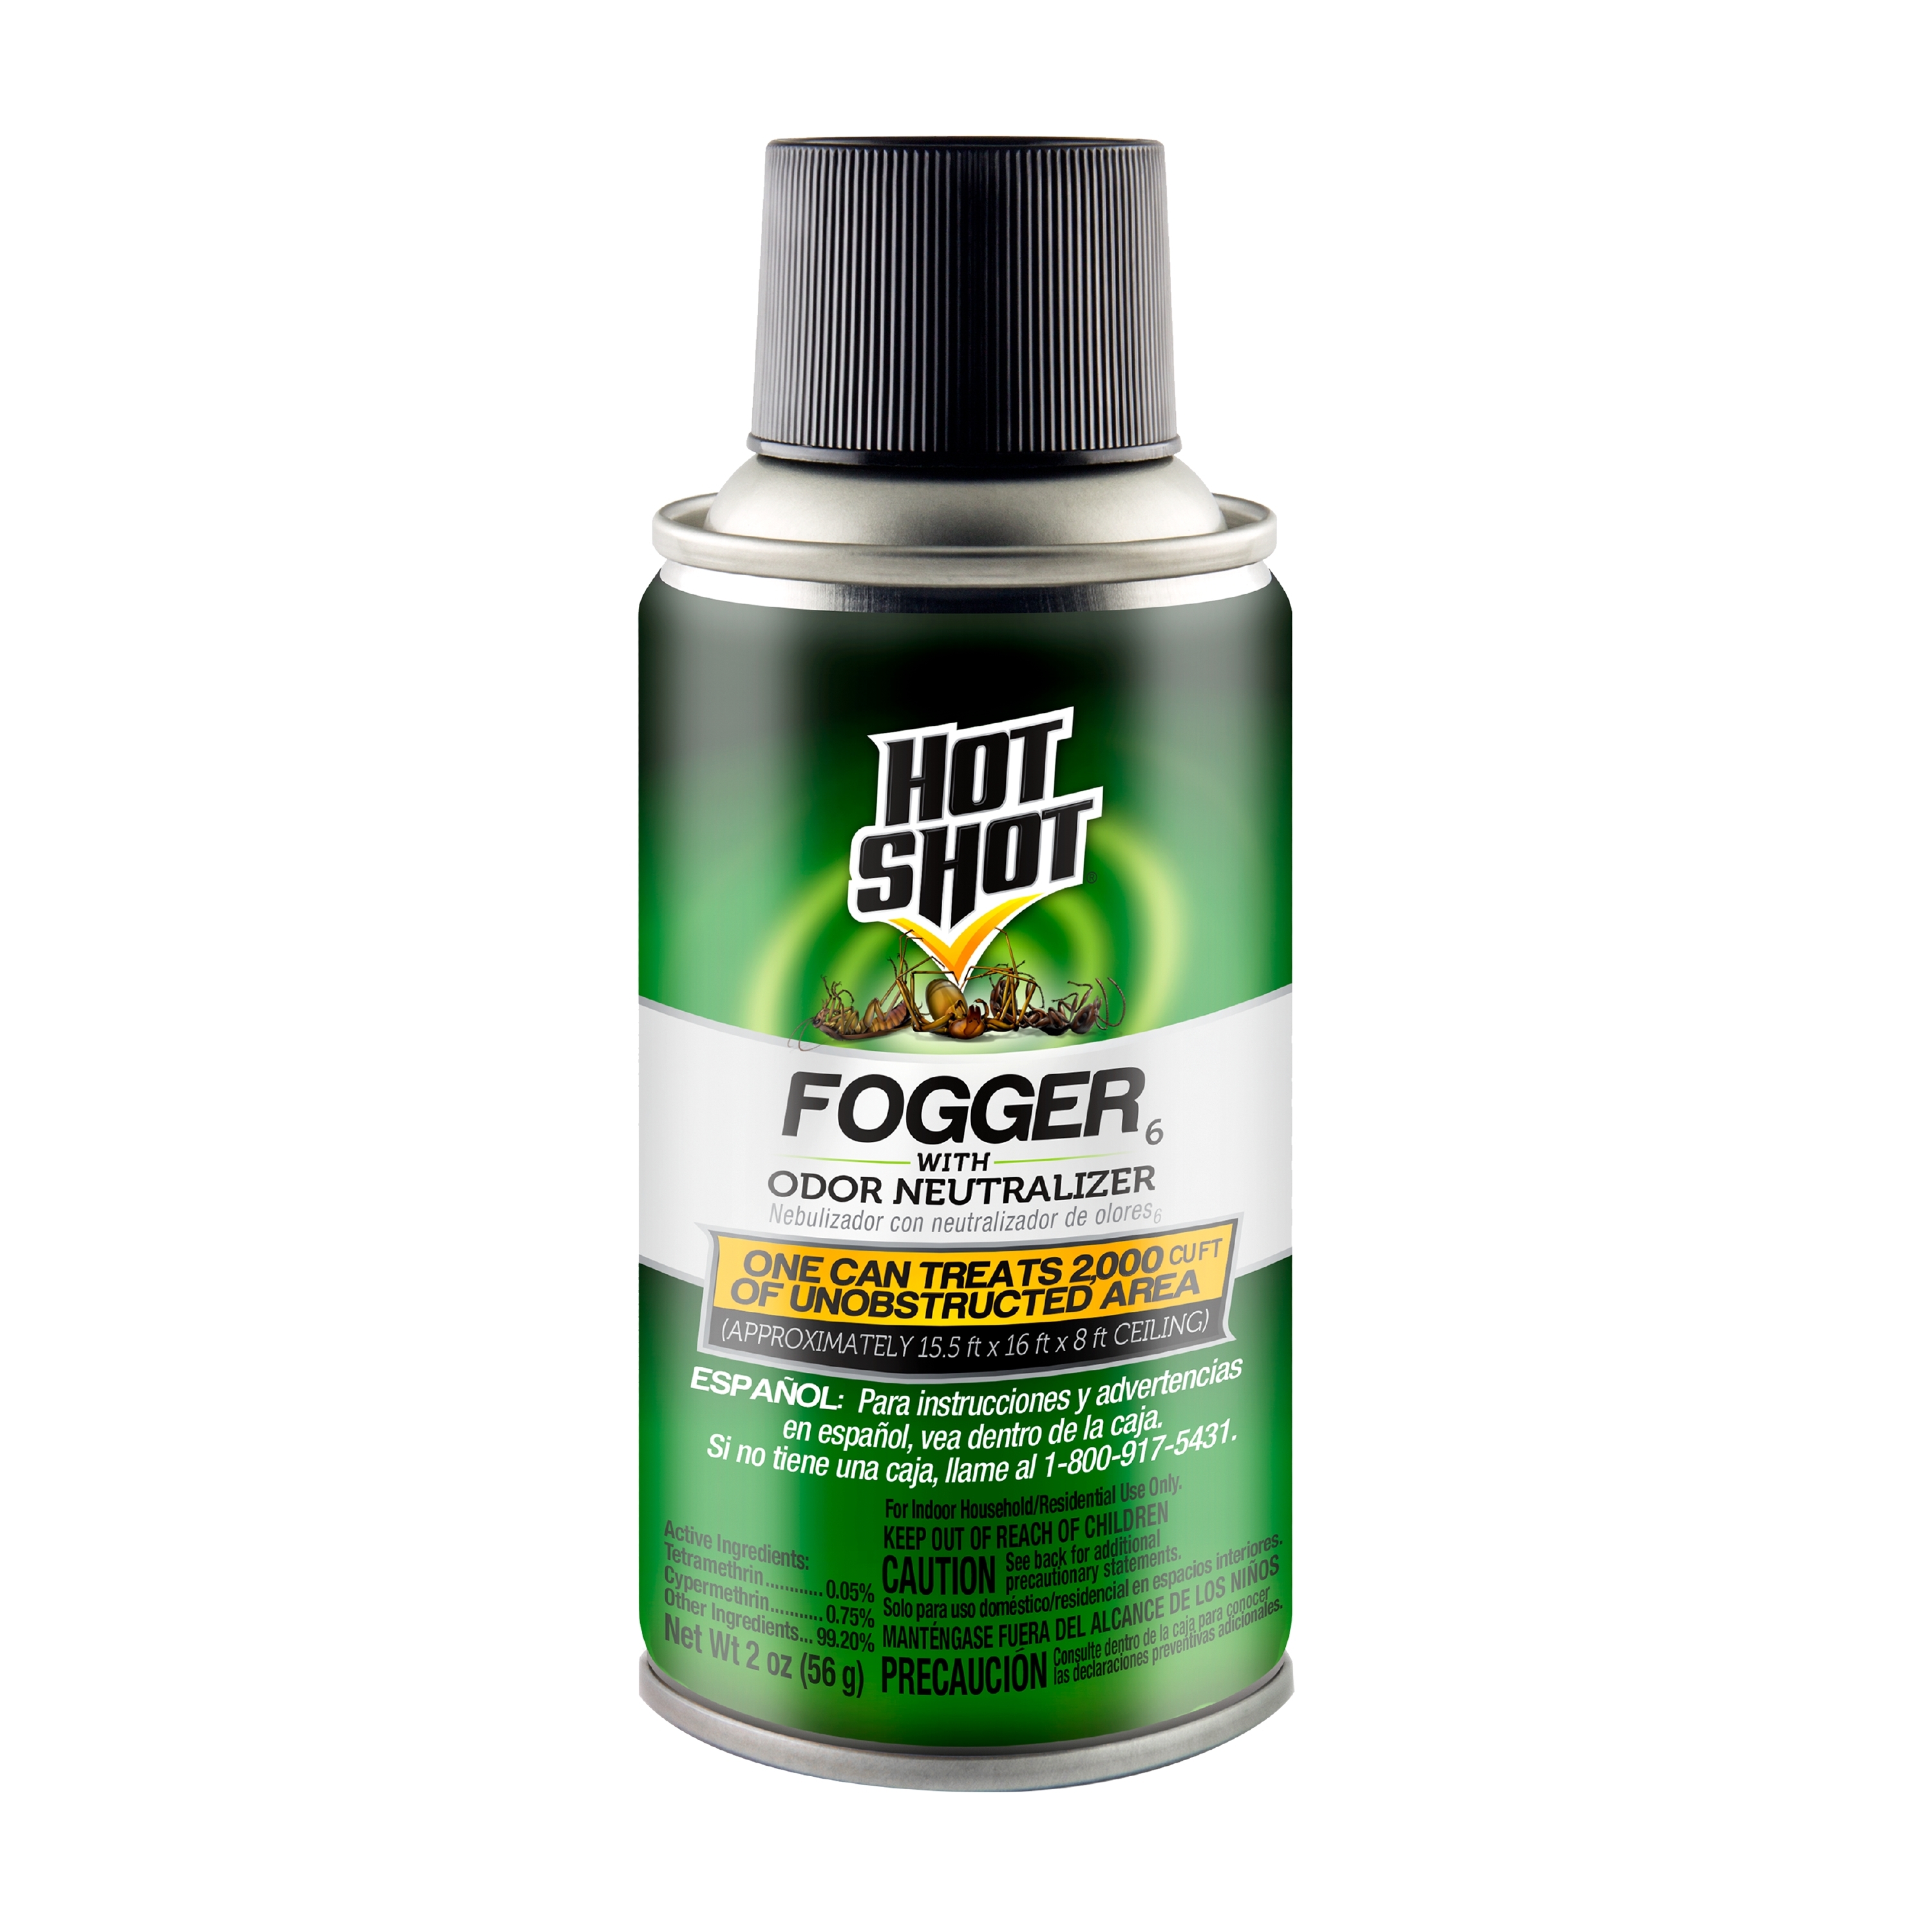 Hot Shot Fogger with Odor Neutralizer, Kills Roaches, Ants, Spiders & Fleas Pack of 6 - image 3 of 11